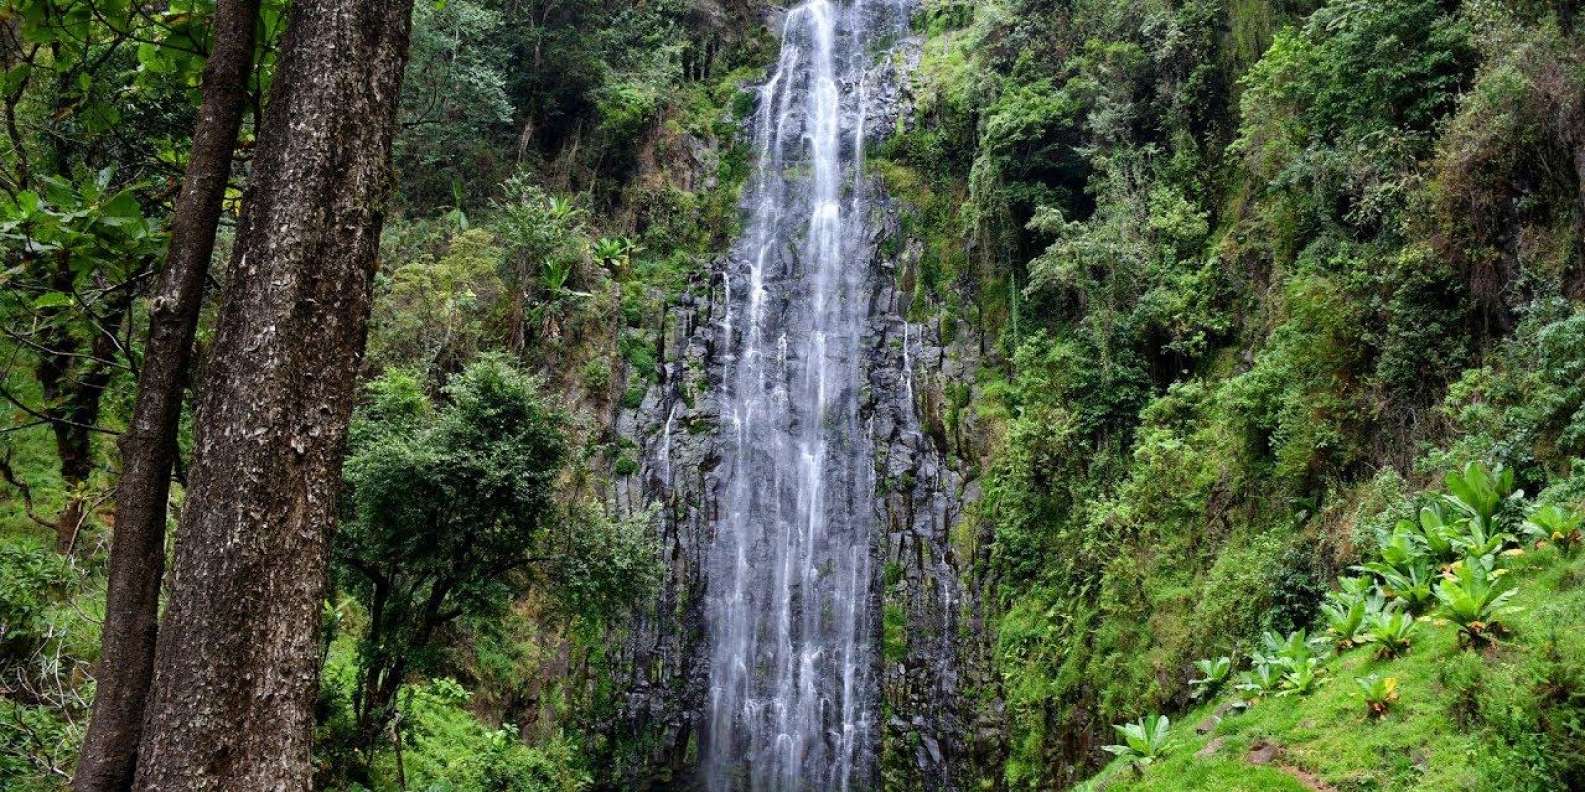 The Best Materuni Waterfall Day Trip, Materuni water fall is one if the impressive water fall found around Kilimanjaro national park